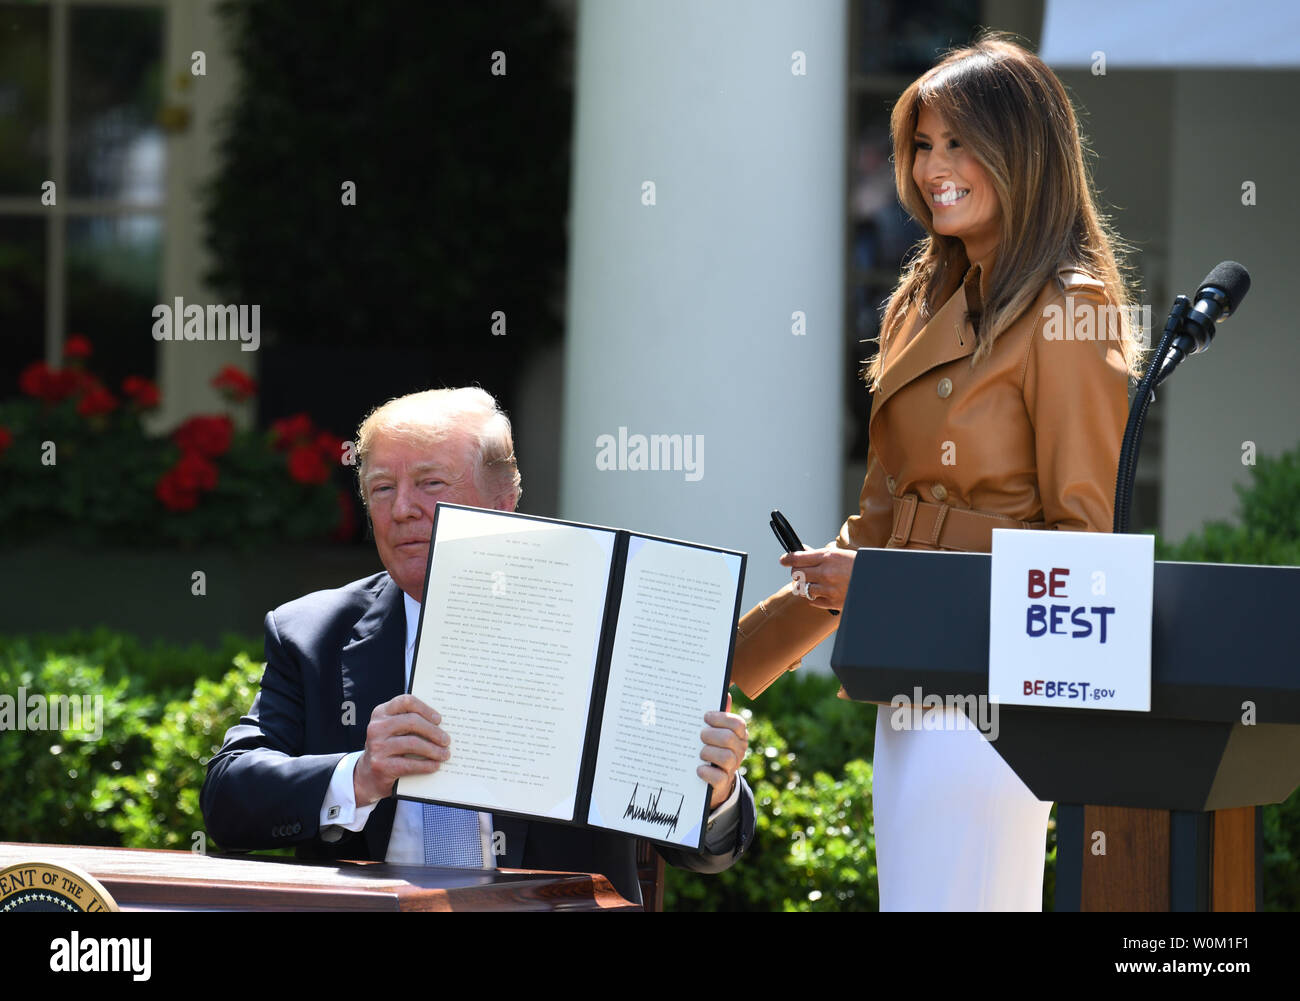 First Lady Melania Trump smiles as U.S. President Donald Trump holds up his proclamation for 'National Be Best Day' after Melania announced her 'Be Best' initiative in the Rose Garden of the White House in Washington, DC on May 7, 2018.  The 'Be Best' program will focus on fighting opioid abuse, positivity on social media, and well-being.       Photo by Pat Benic/UPI Stock Photo